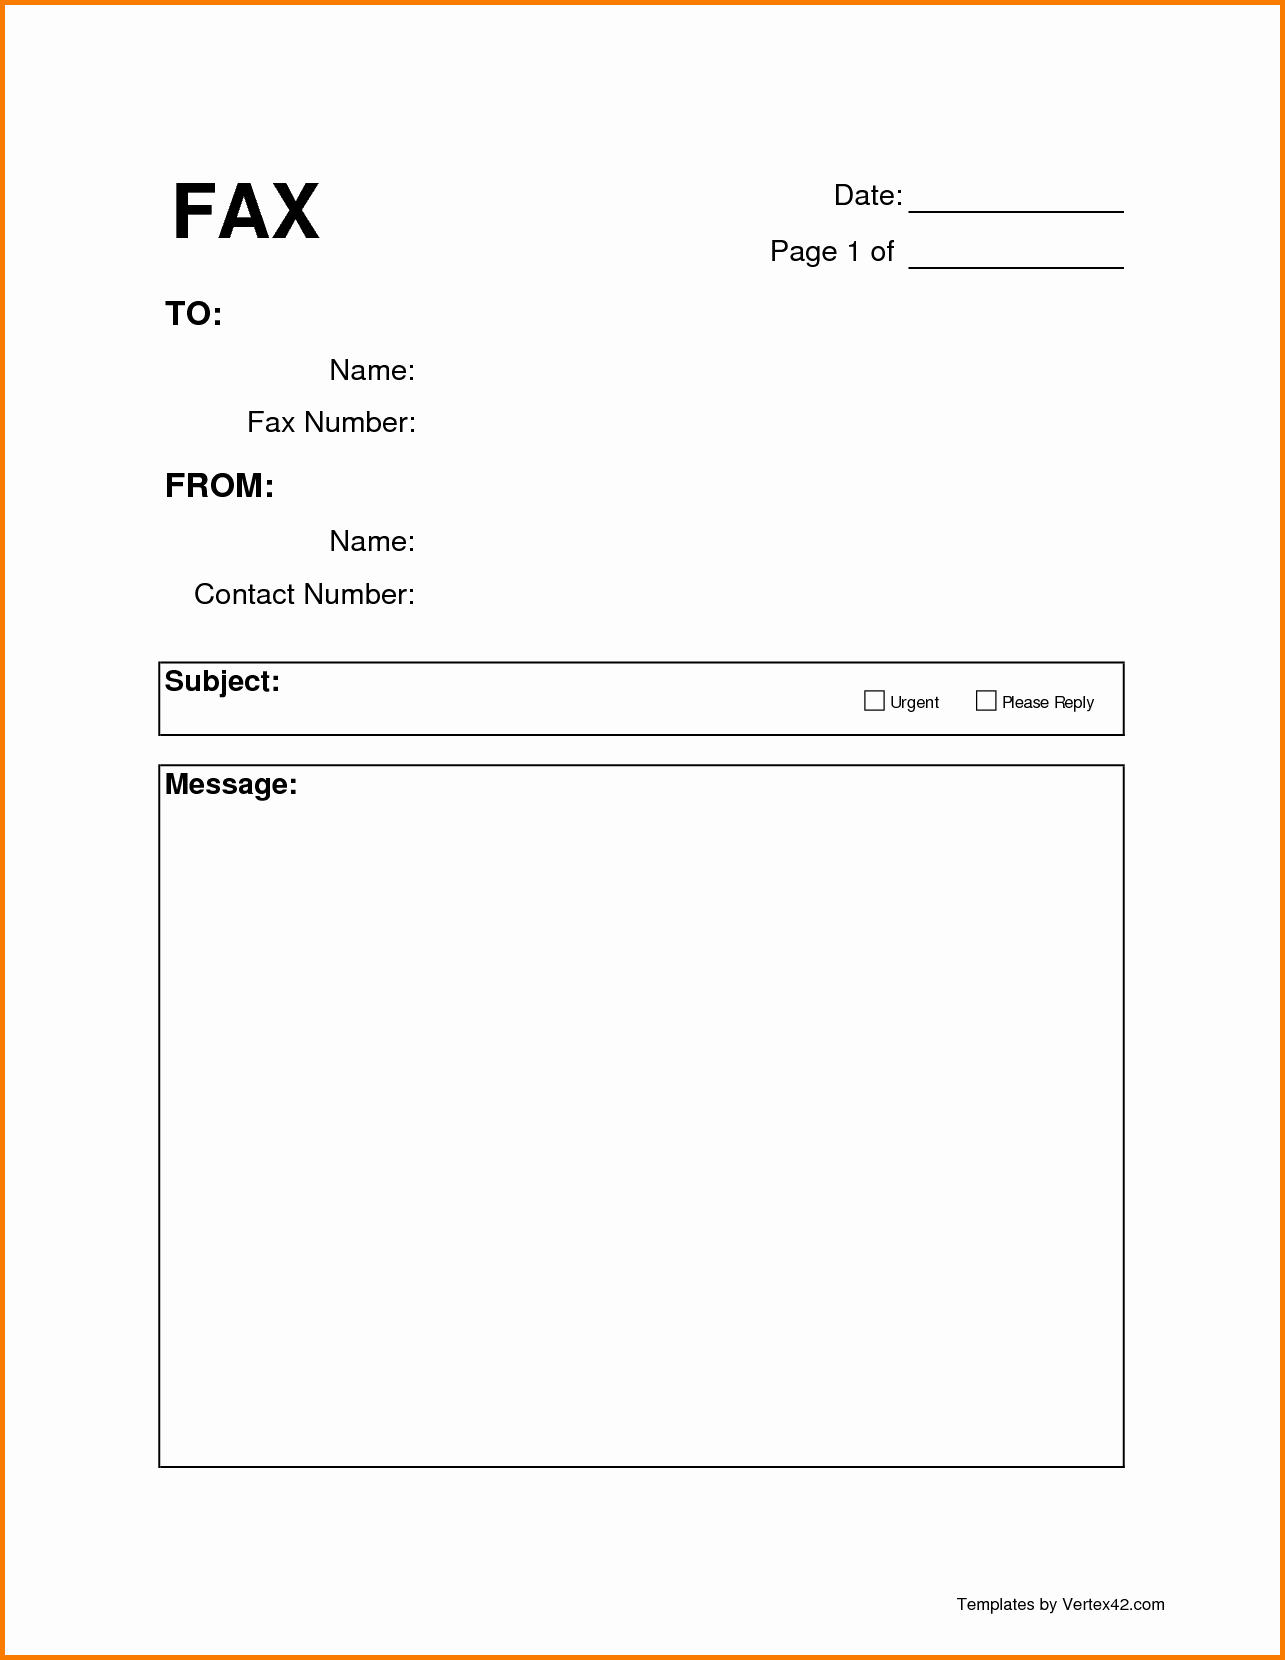 Cover Letter format Uf Awesome Fax form Template Bamboodownunder